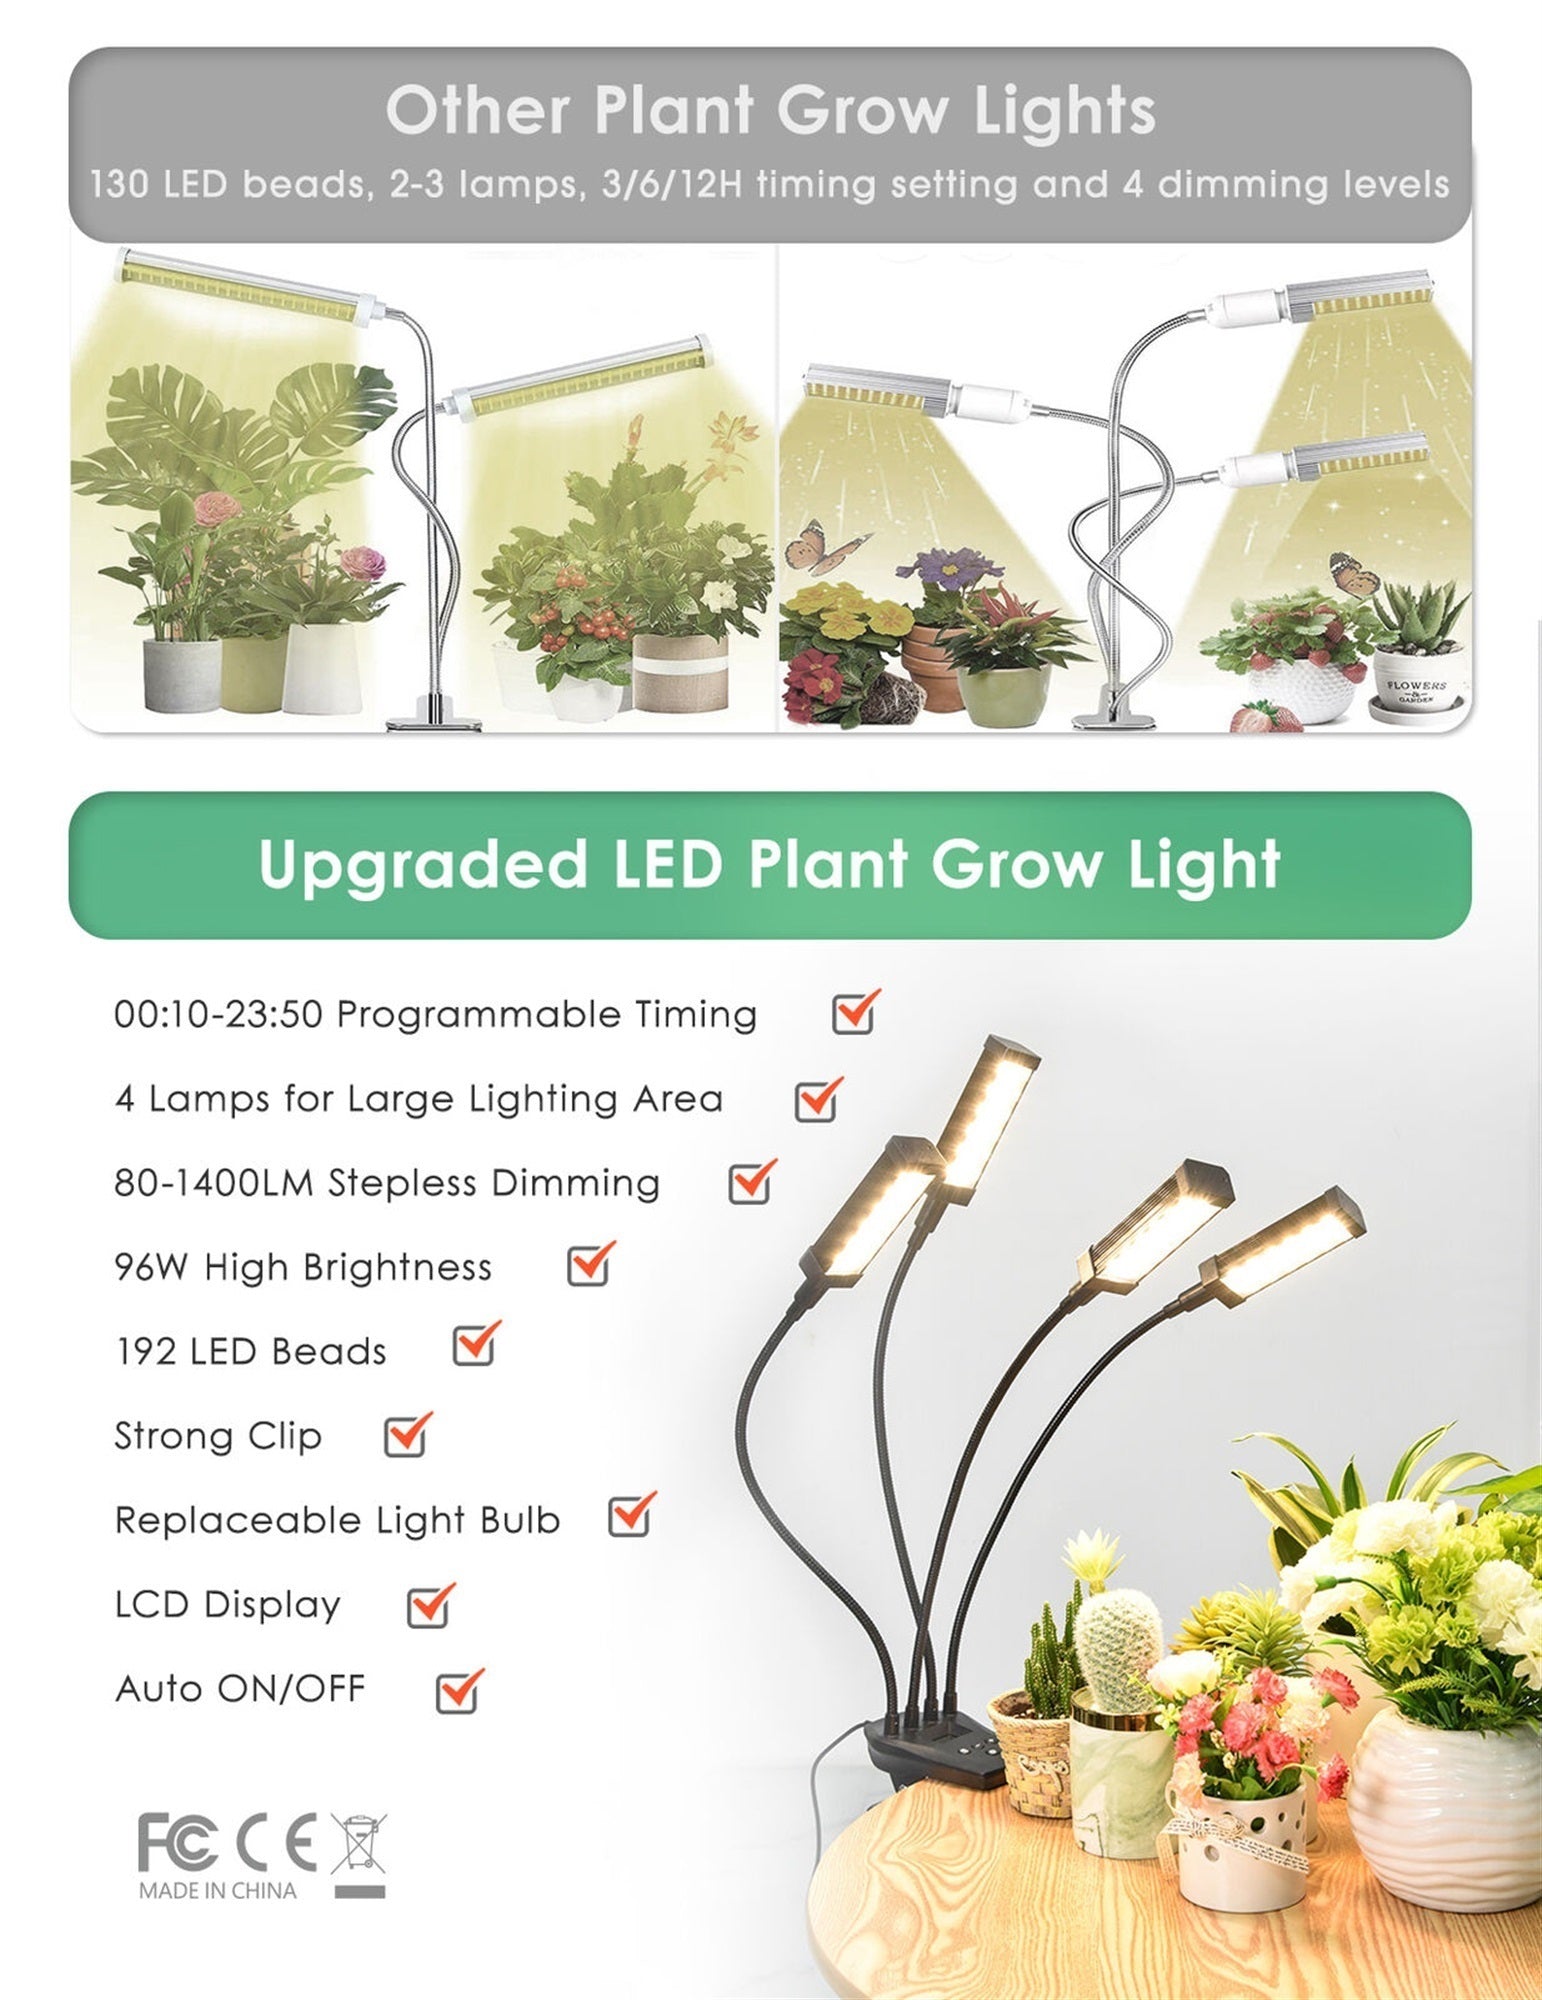 Garden Elements 4 Heads 96W LED Grow Light Growing Lamp for Indoor Plant Hydroponics, Black